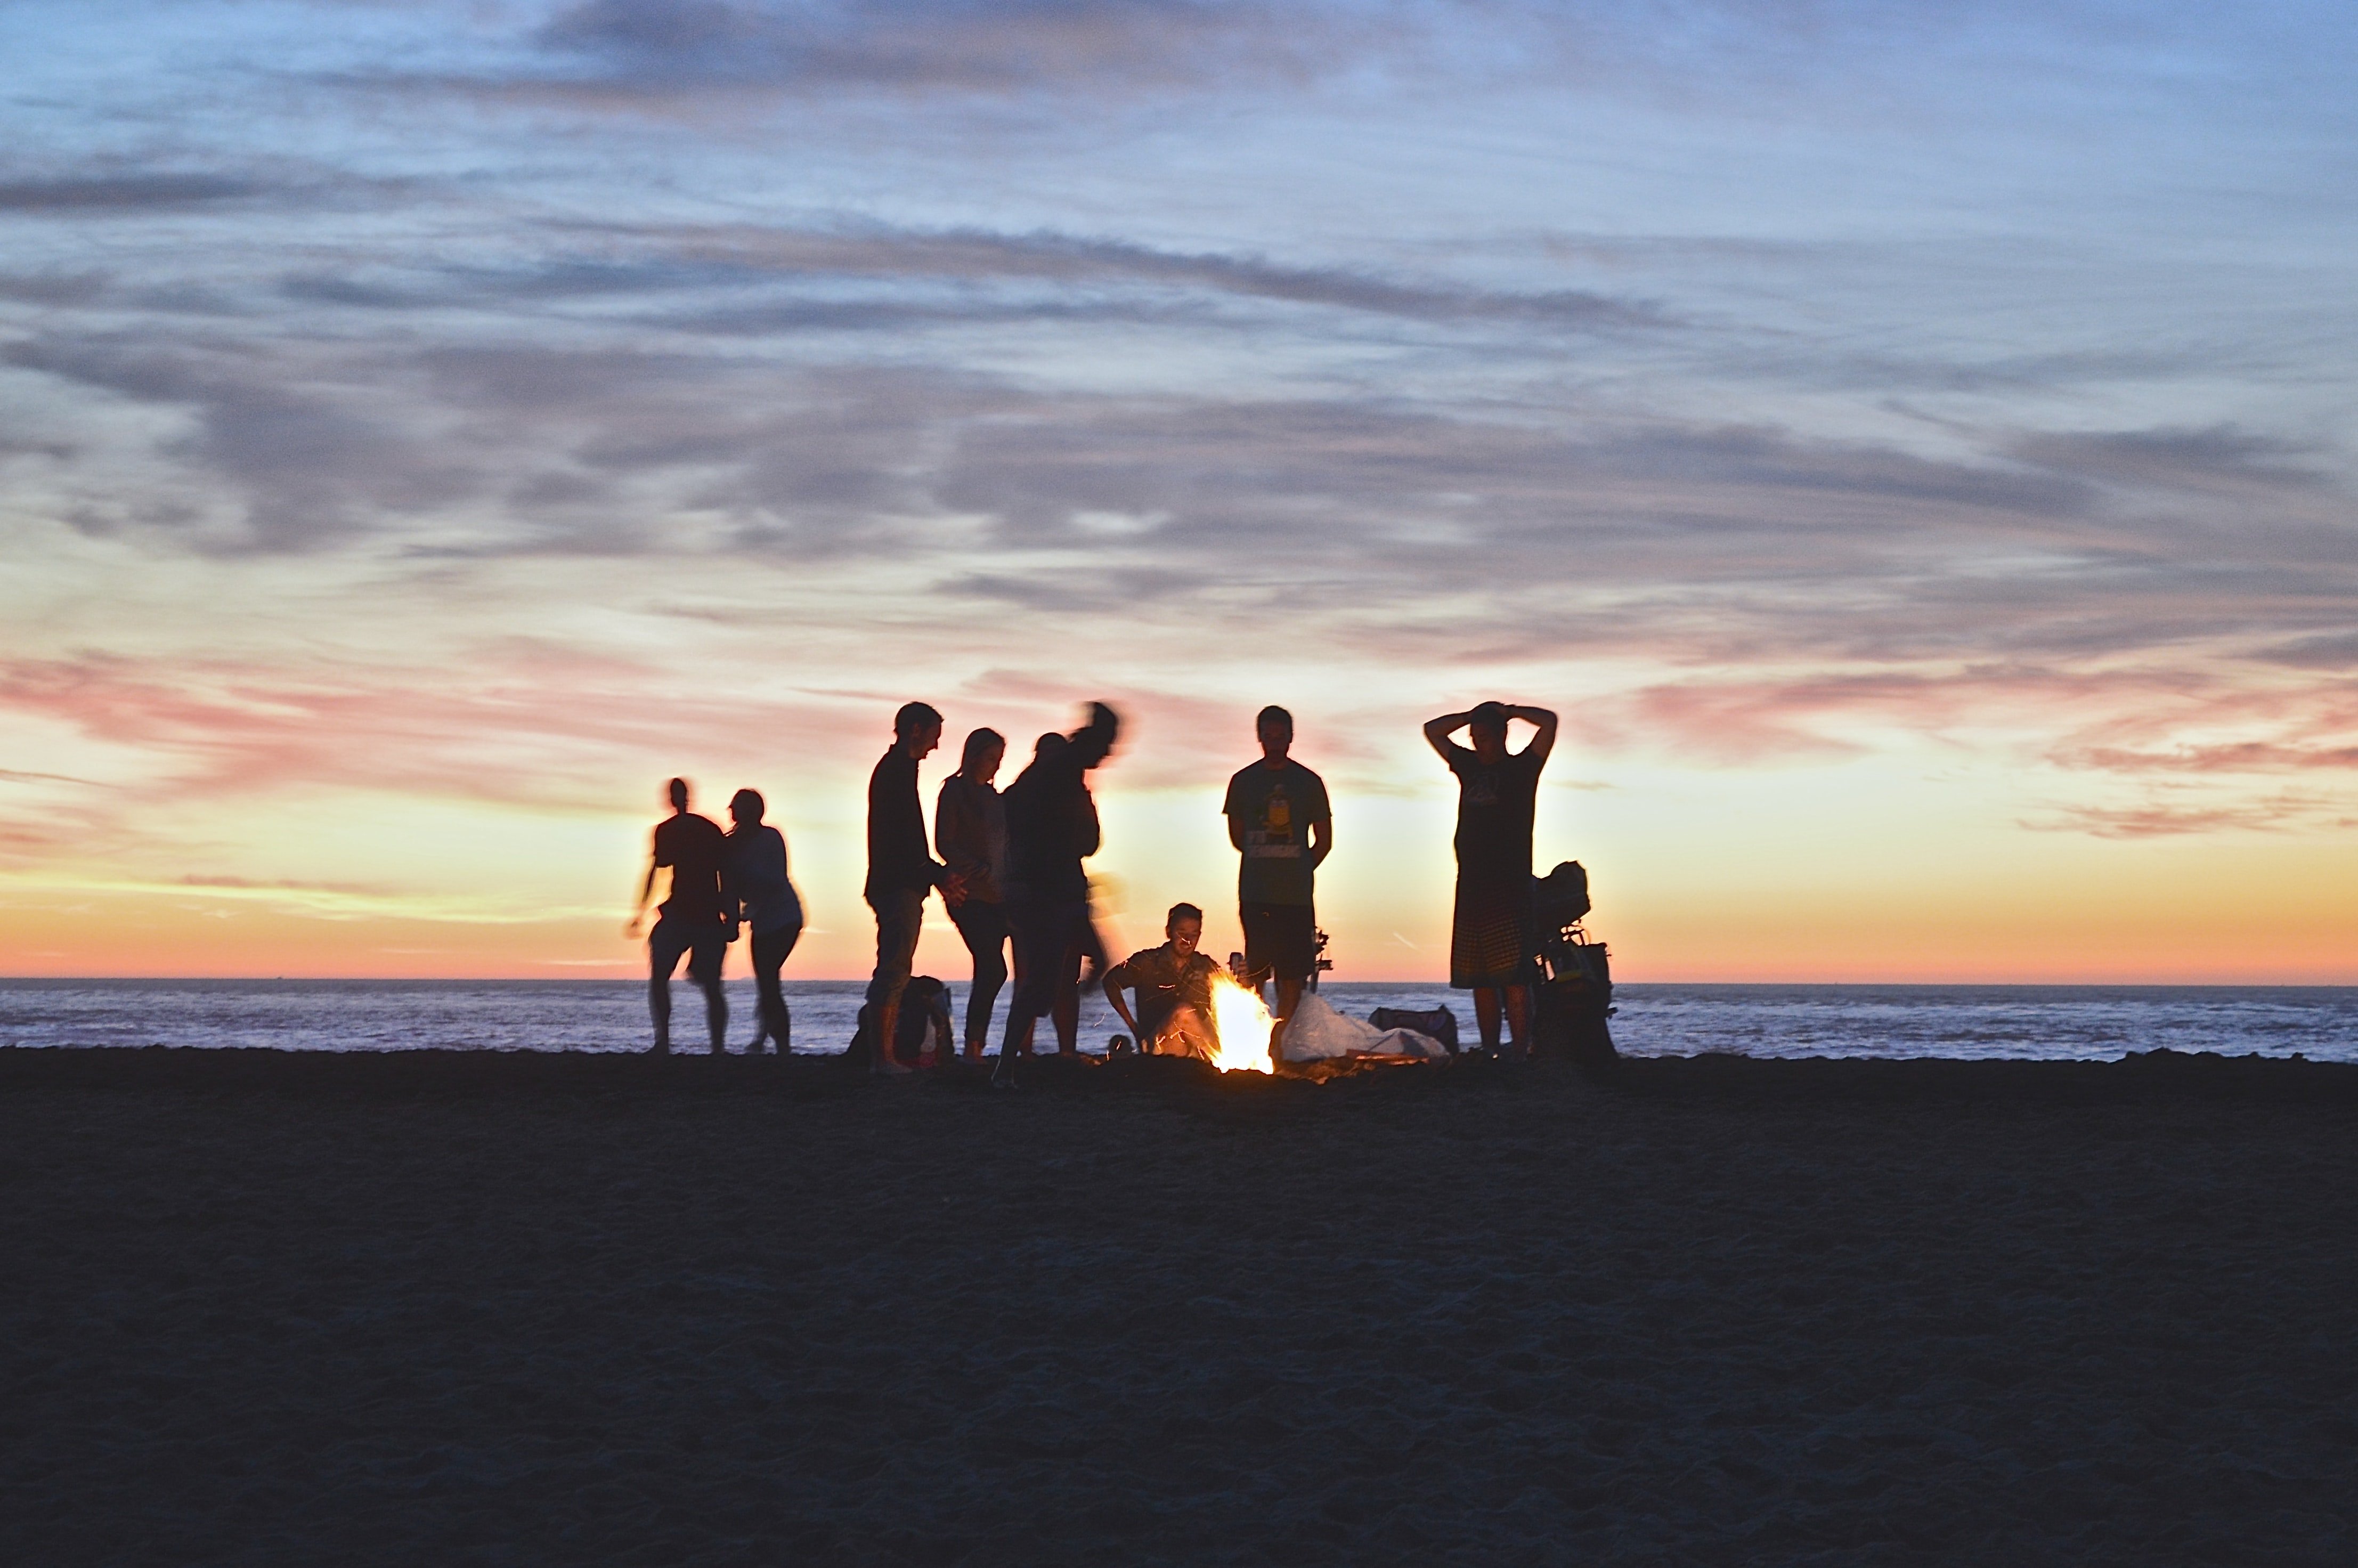 A group of men having fun at the beach | Source: Unsplash